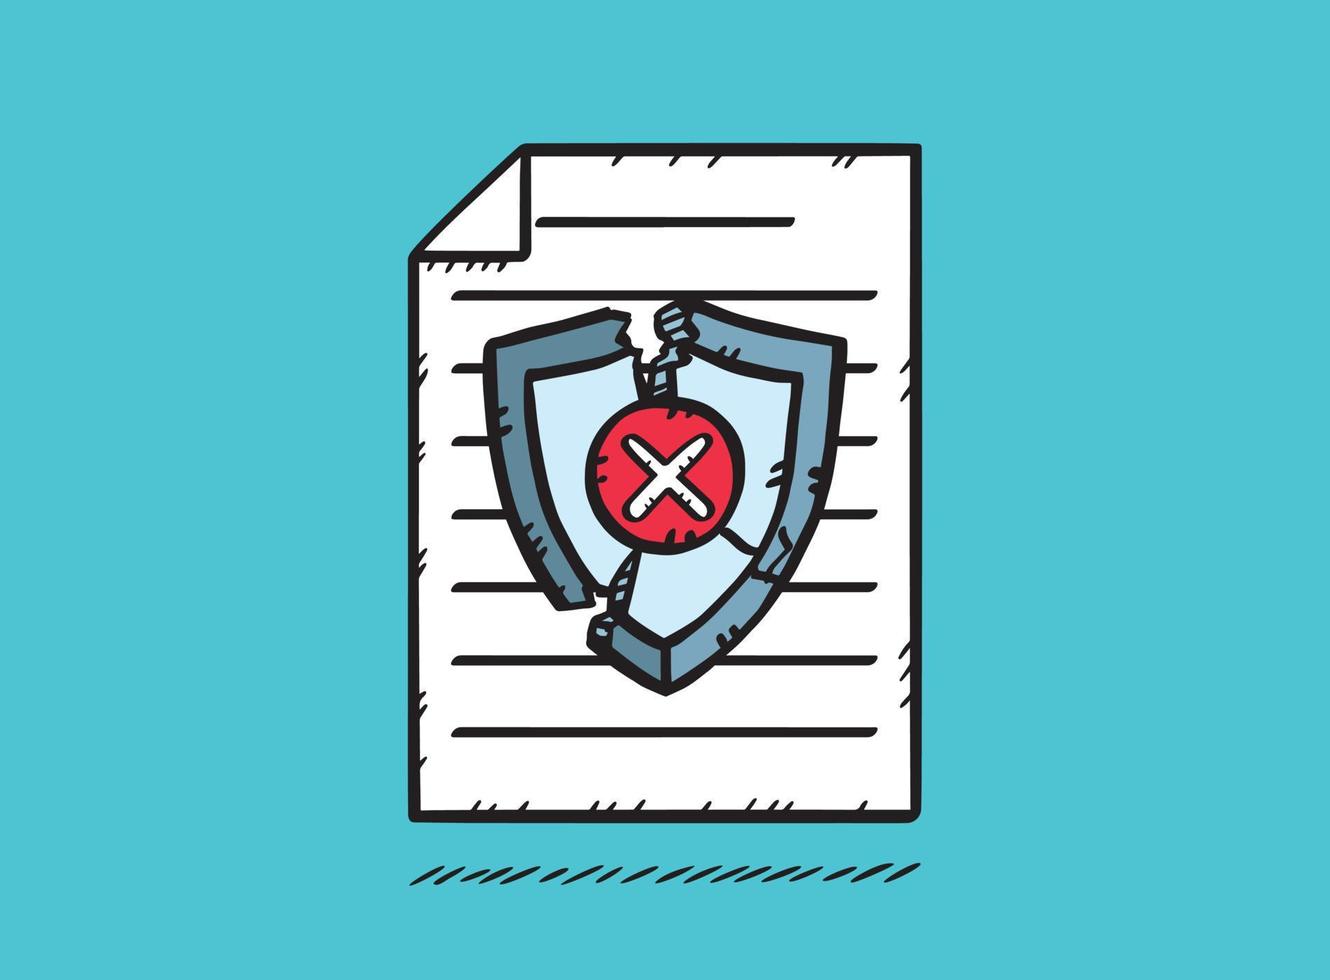 Document with cracked antivirus shield. The shield has a red x-stamp. Hand-drawn vector graphic.